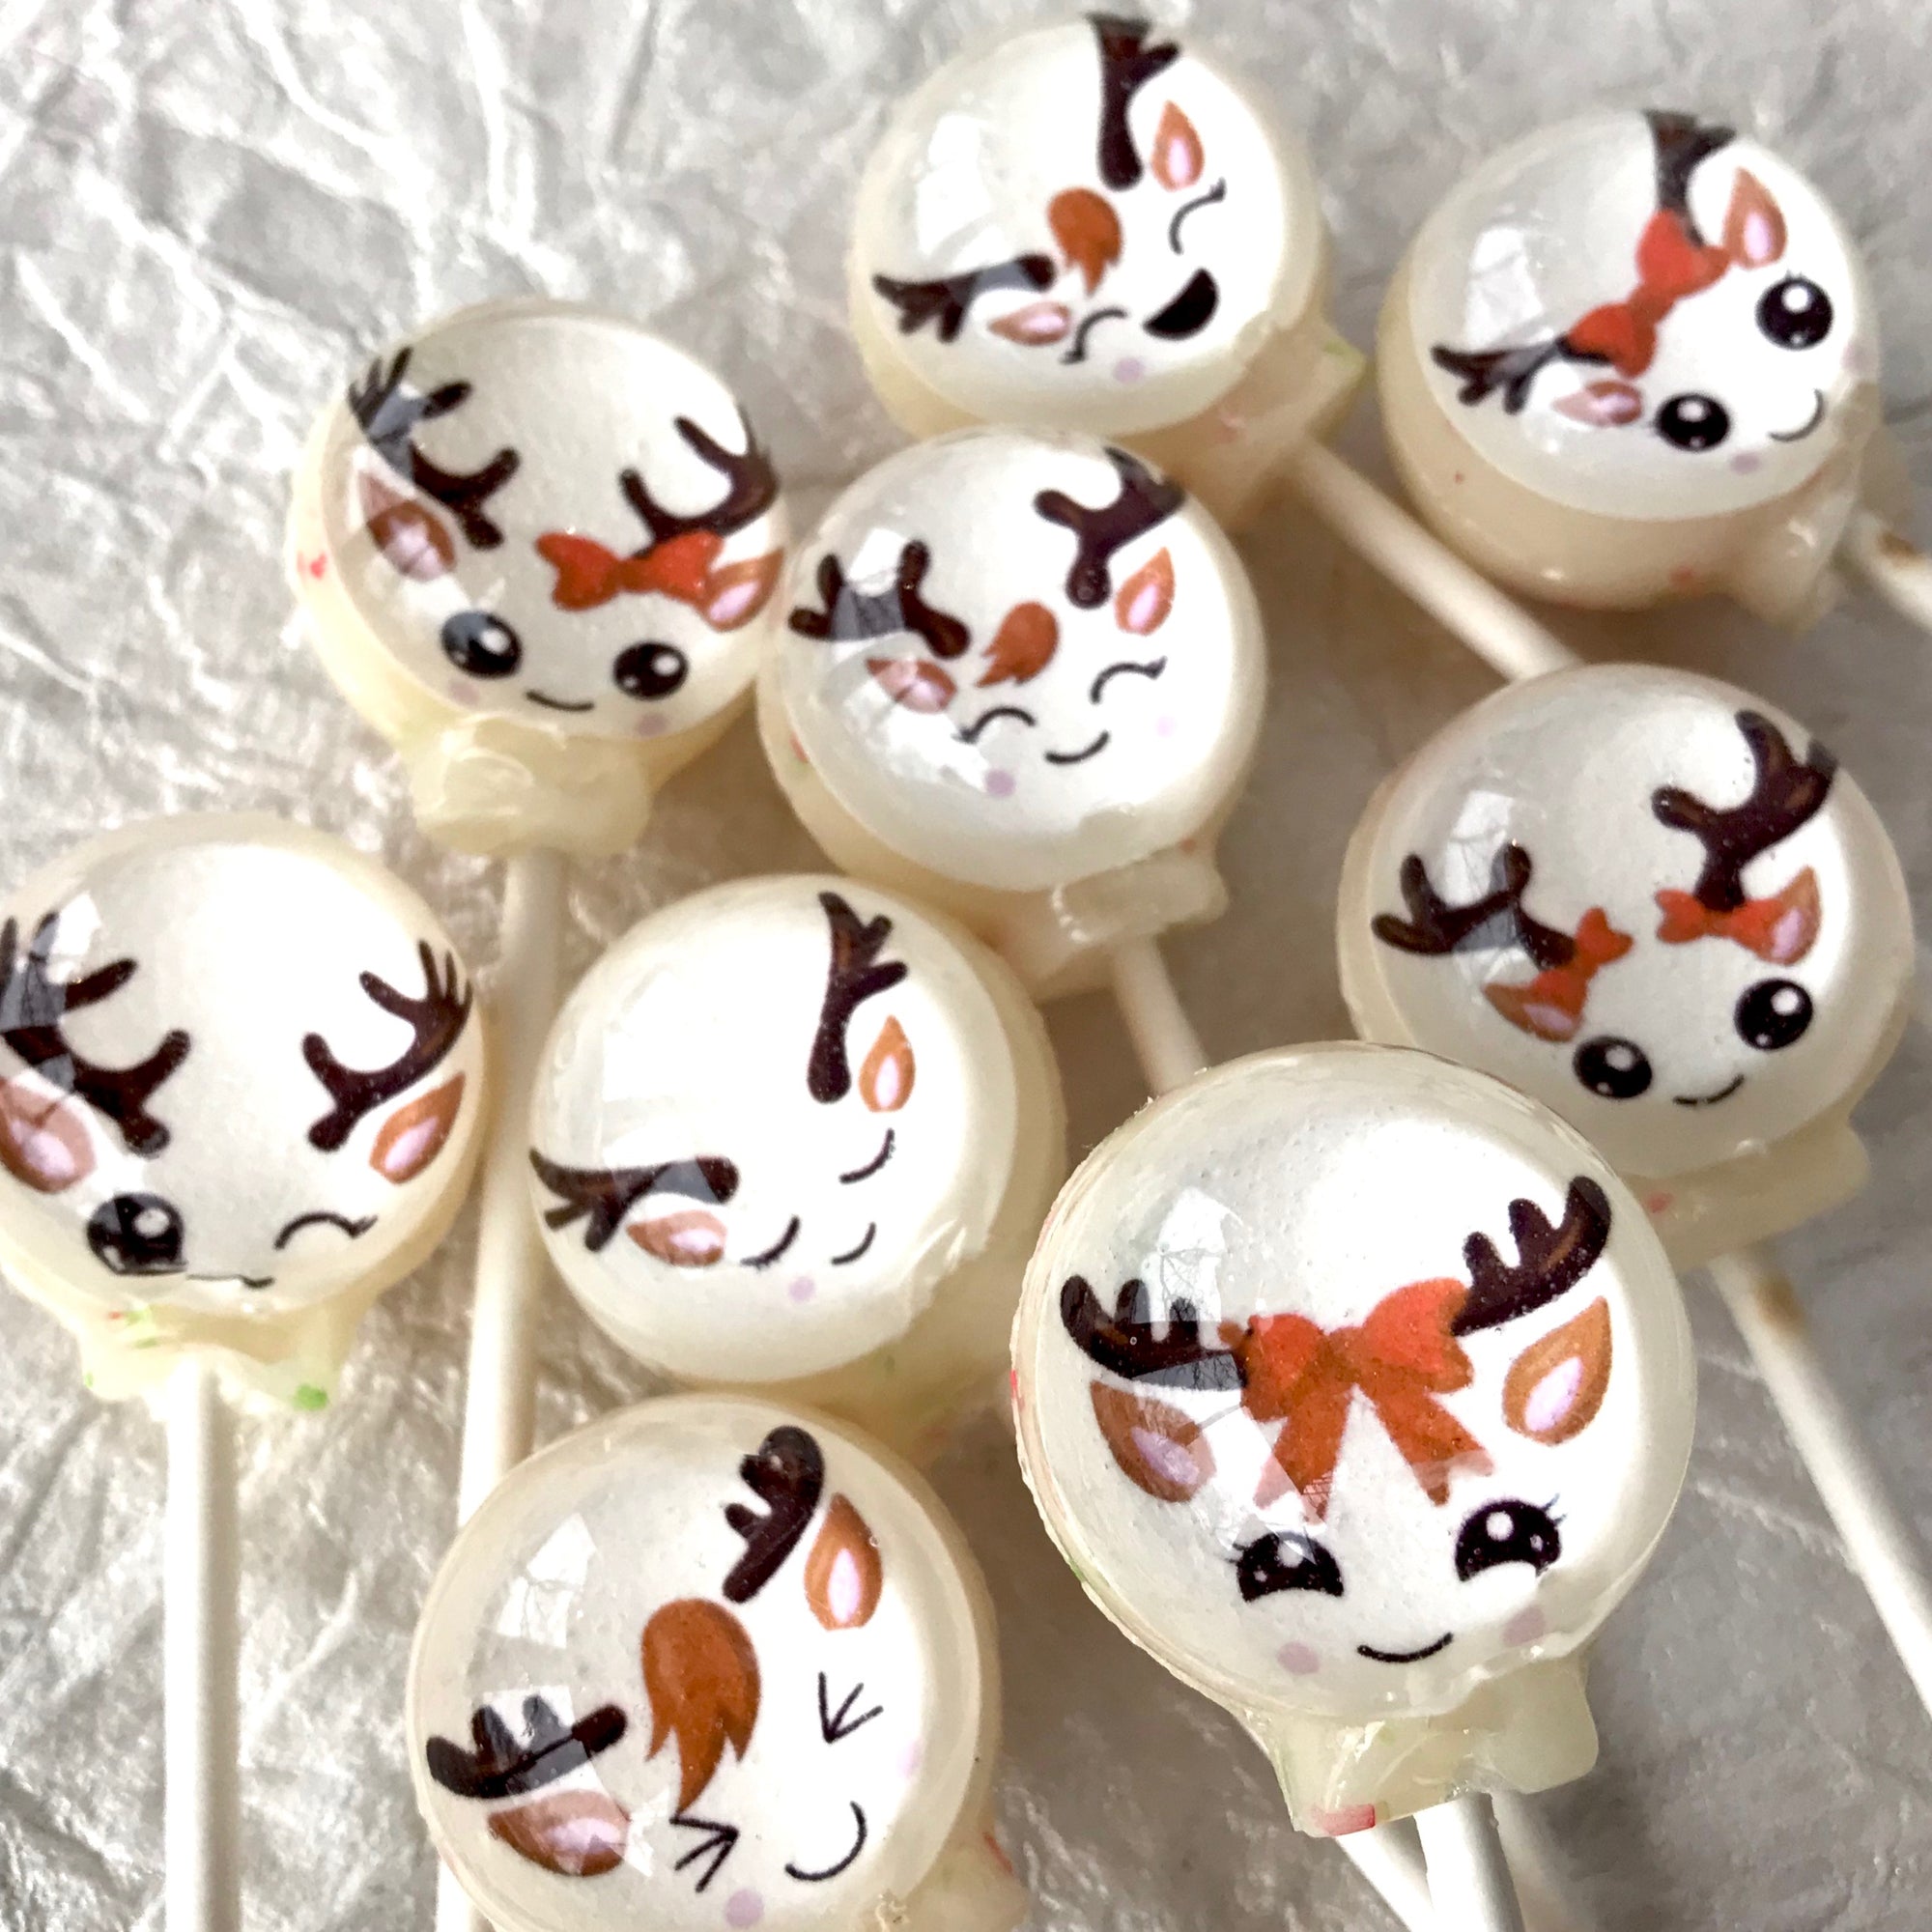 Jolly Reindeer Lollipops 6-piece set by I Want Candy!